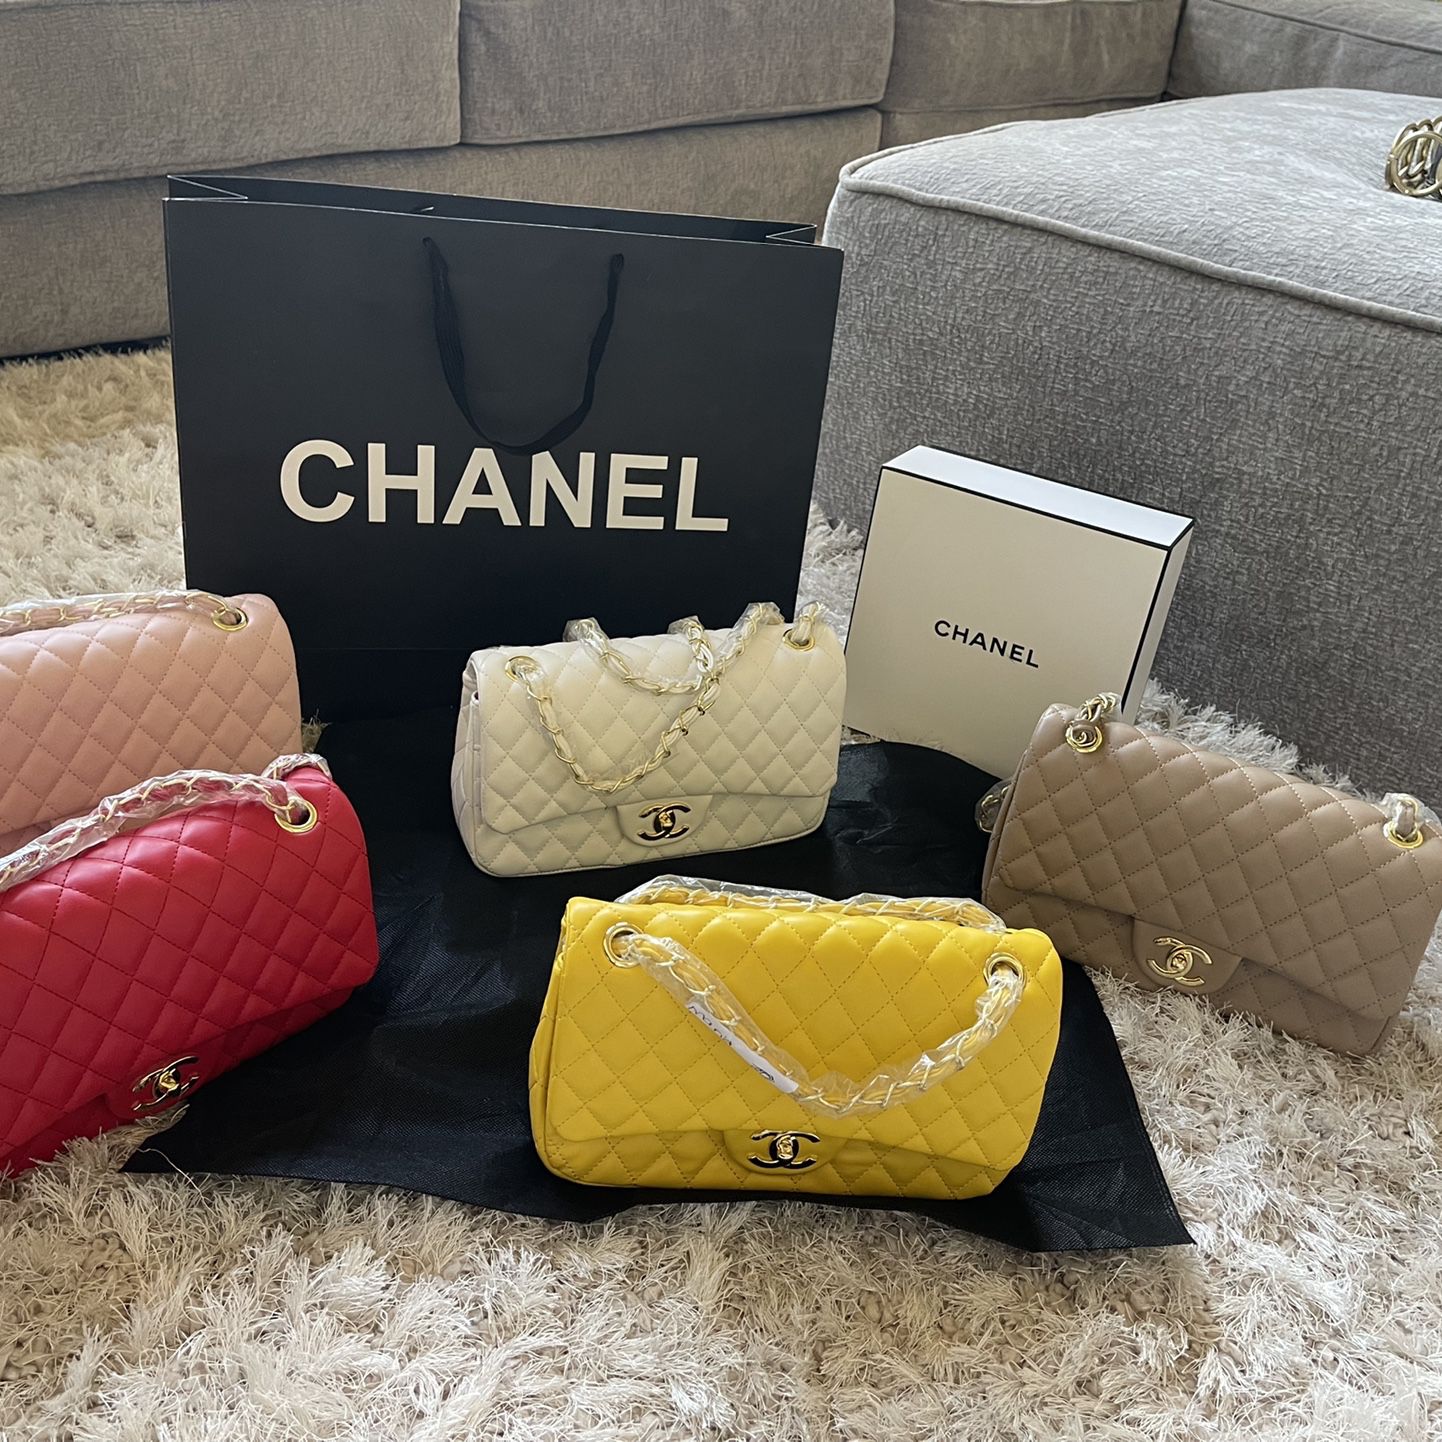 Chanel Bag for Sale in San Antonio, TX - OfferUp